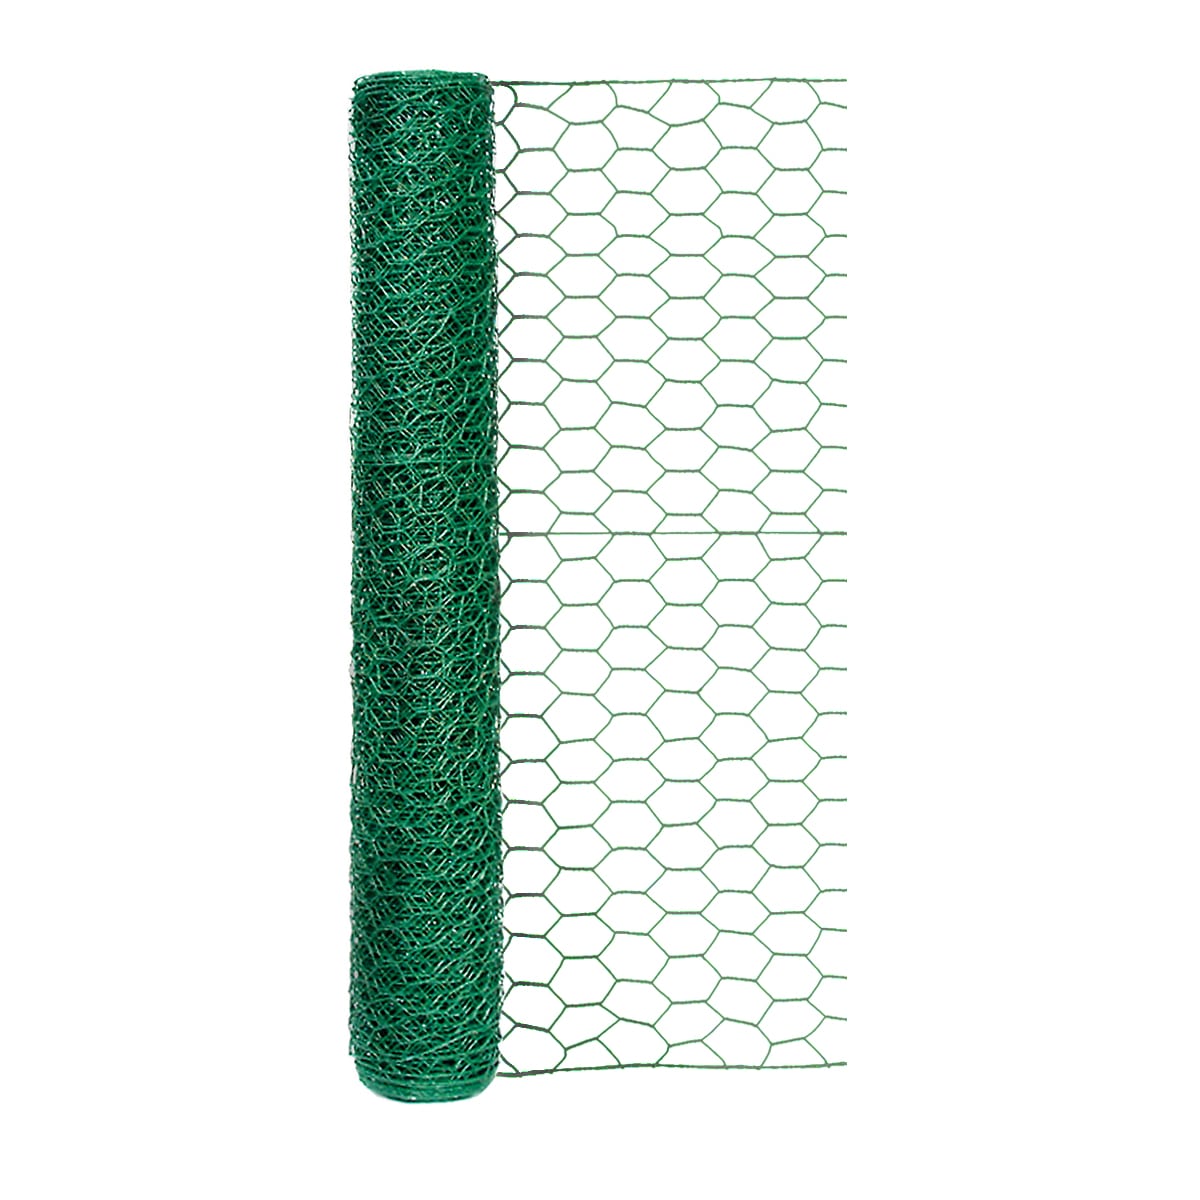 Green Vinyl Chicken Wire with 1in Openings